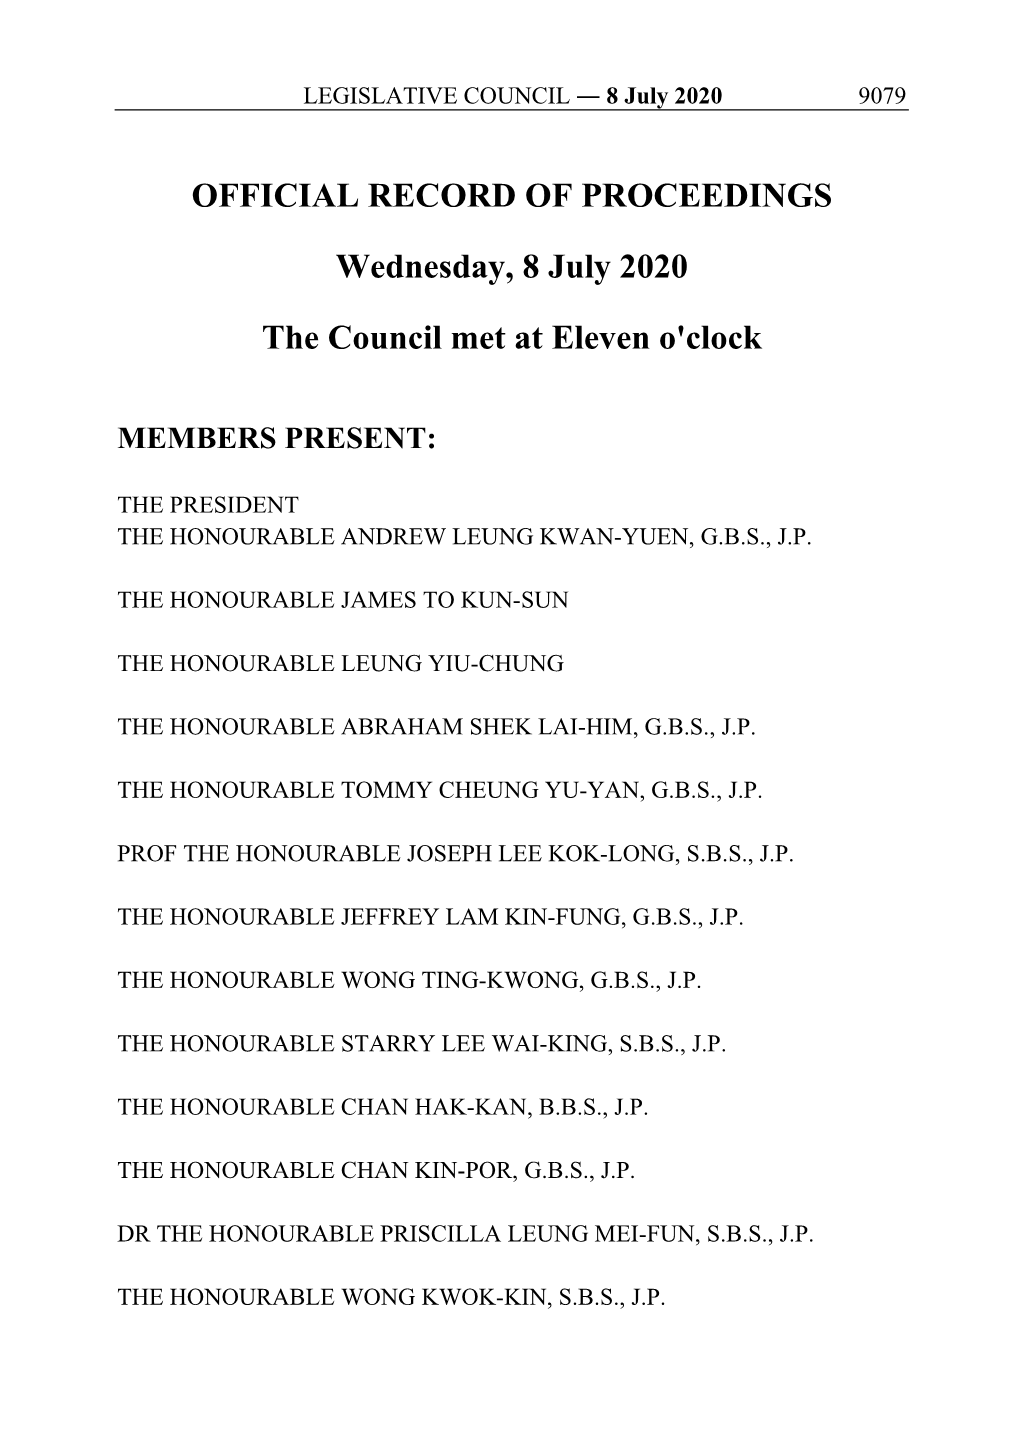 OFFICIAL RECORD of PROCEEDINGS Wednesday, 8 July